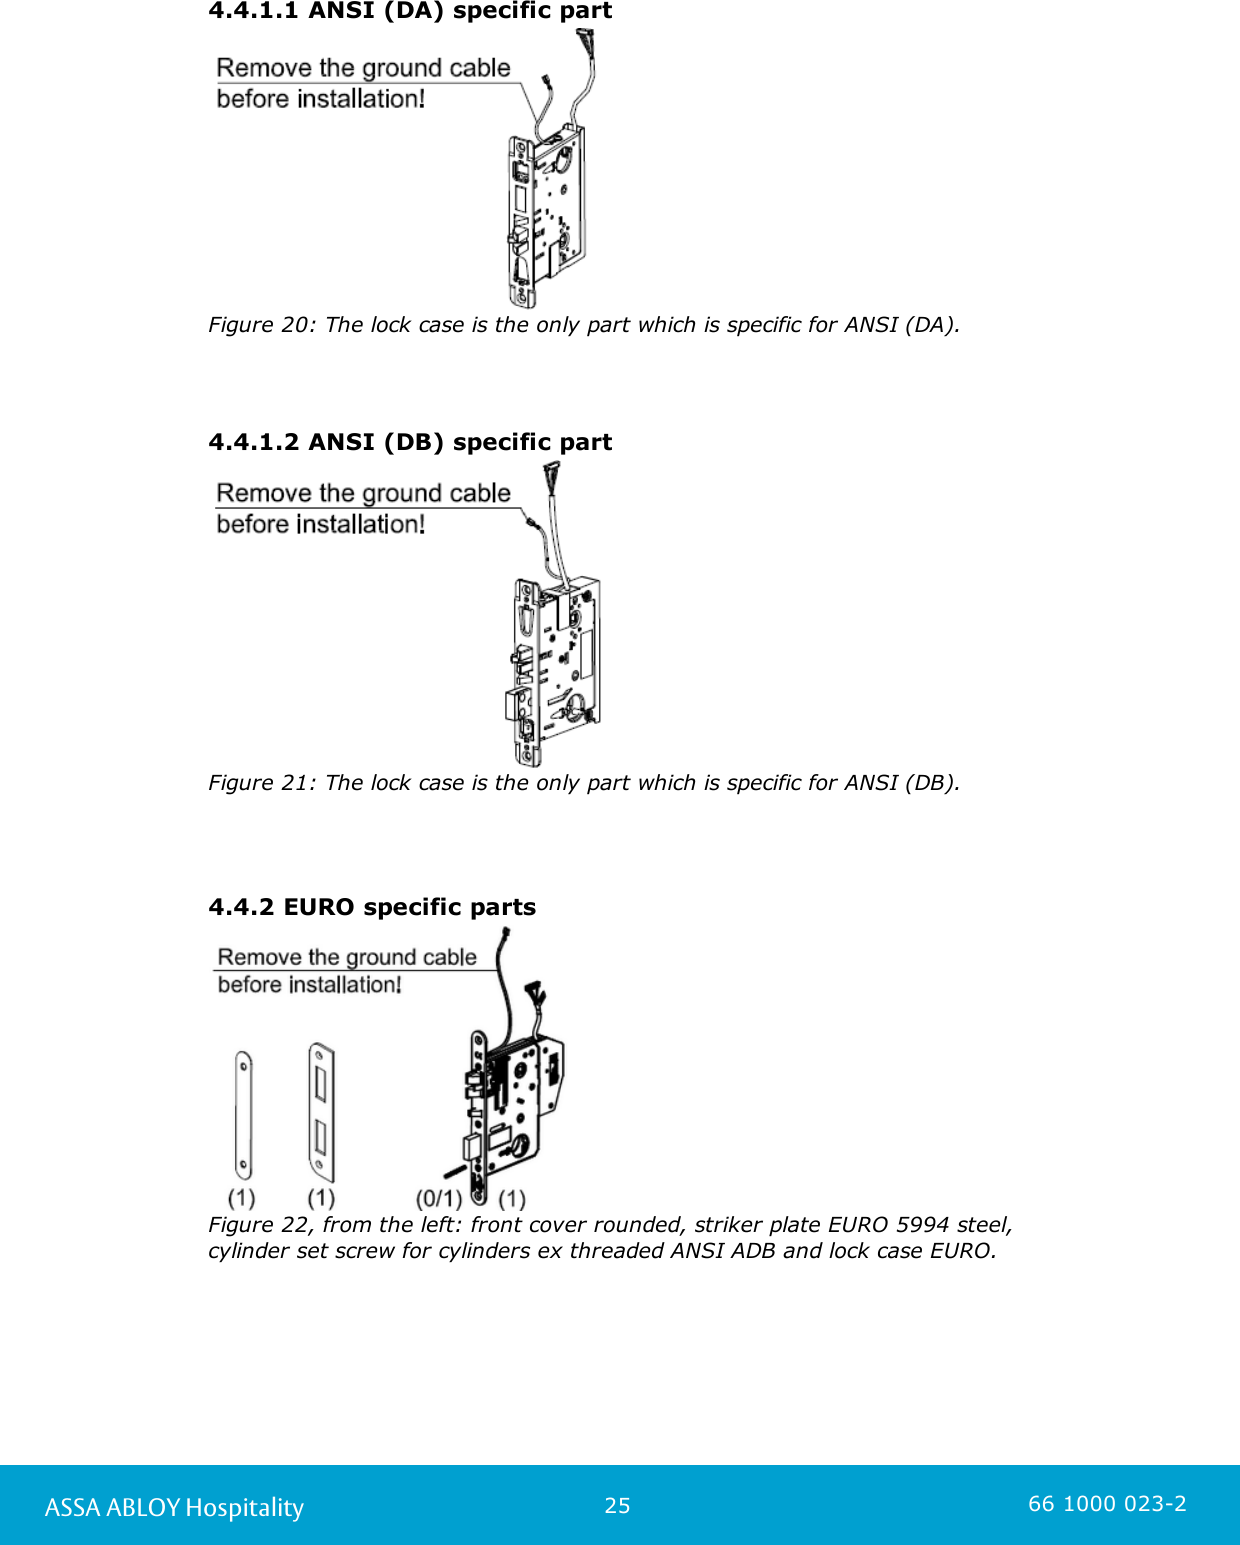 25ASSA ABLOY Hospitality 66 1000 023-24.4.1.1 ANSI (DA) specific partFigure 20: The lock case is the only part which is specific for ANSI (DA). 4.4.1.2 ANSI (DB) specific partFigure 21: The lock case is the only part which is specific for ANSI (DB). 4.4.2 EURO specific partsFigure 22, from the left: front cover rounded, striker plate EURO 5994 steel, cylinder set screw for cylinders ex threaded ANSI ADB and lock case EURO. 